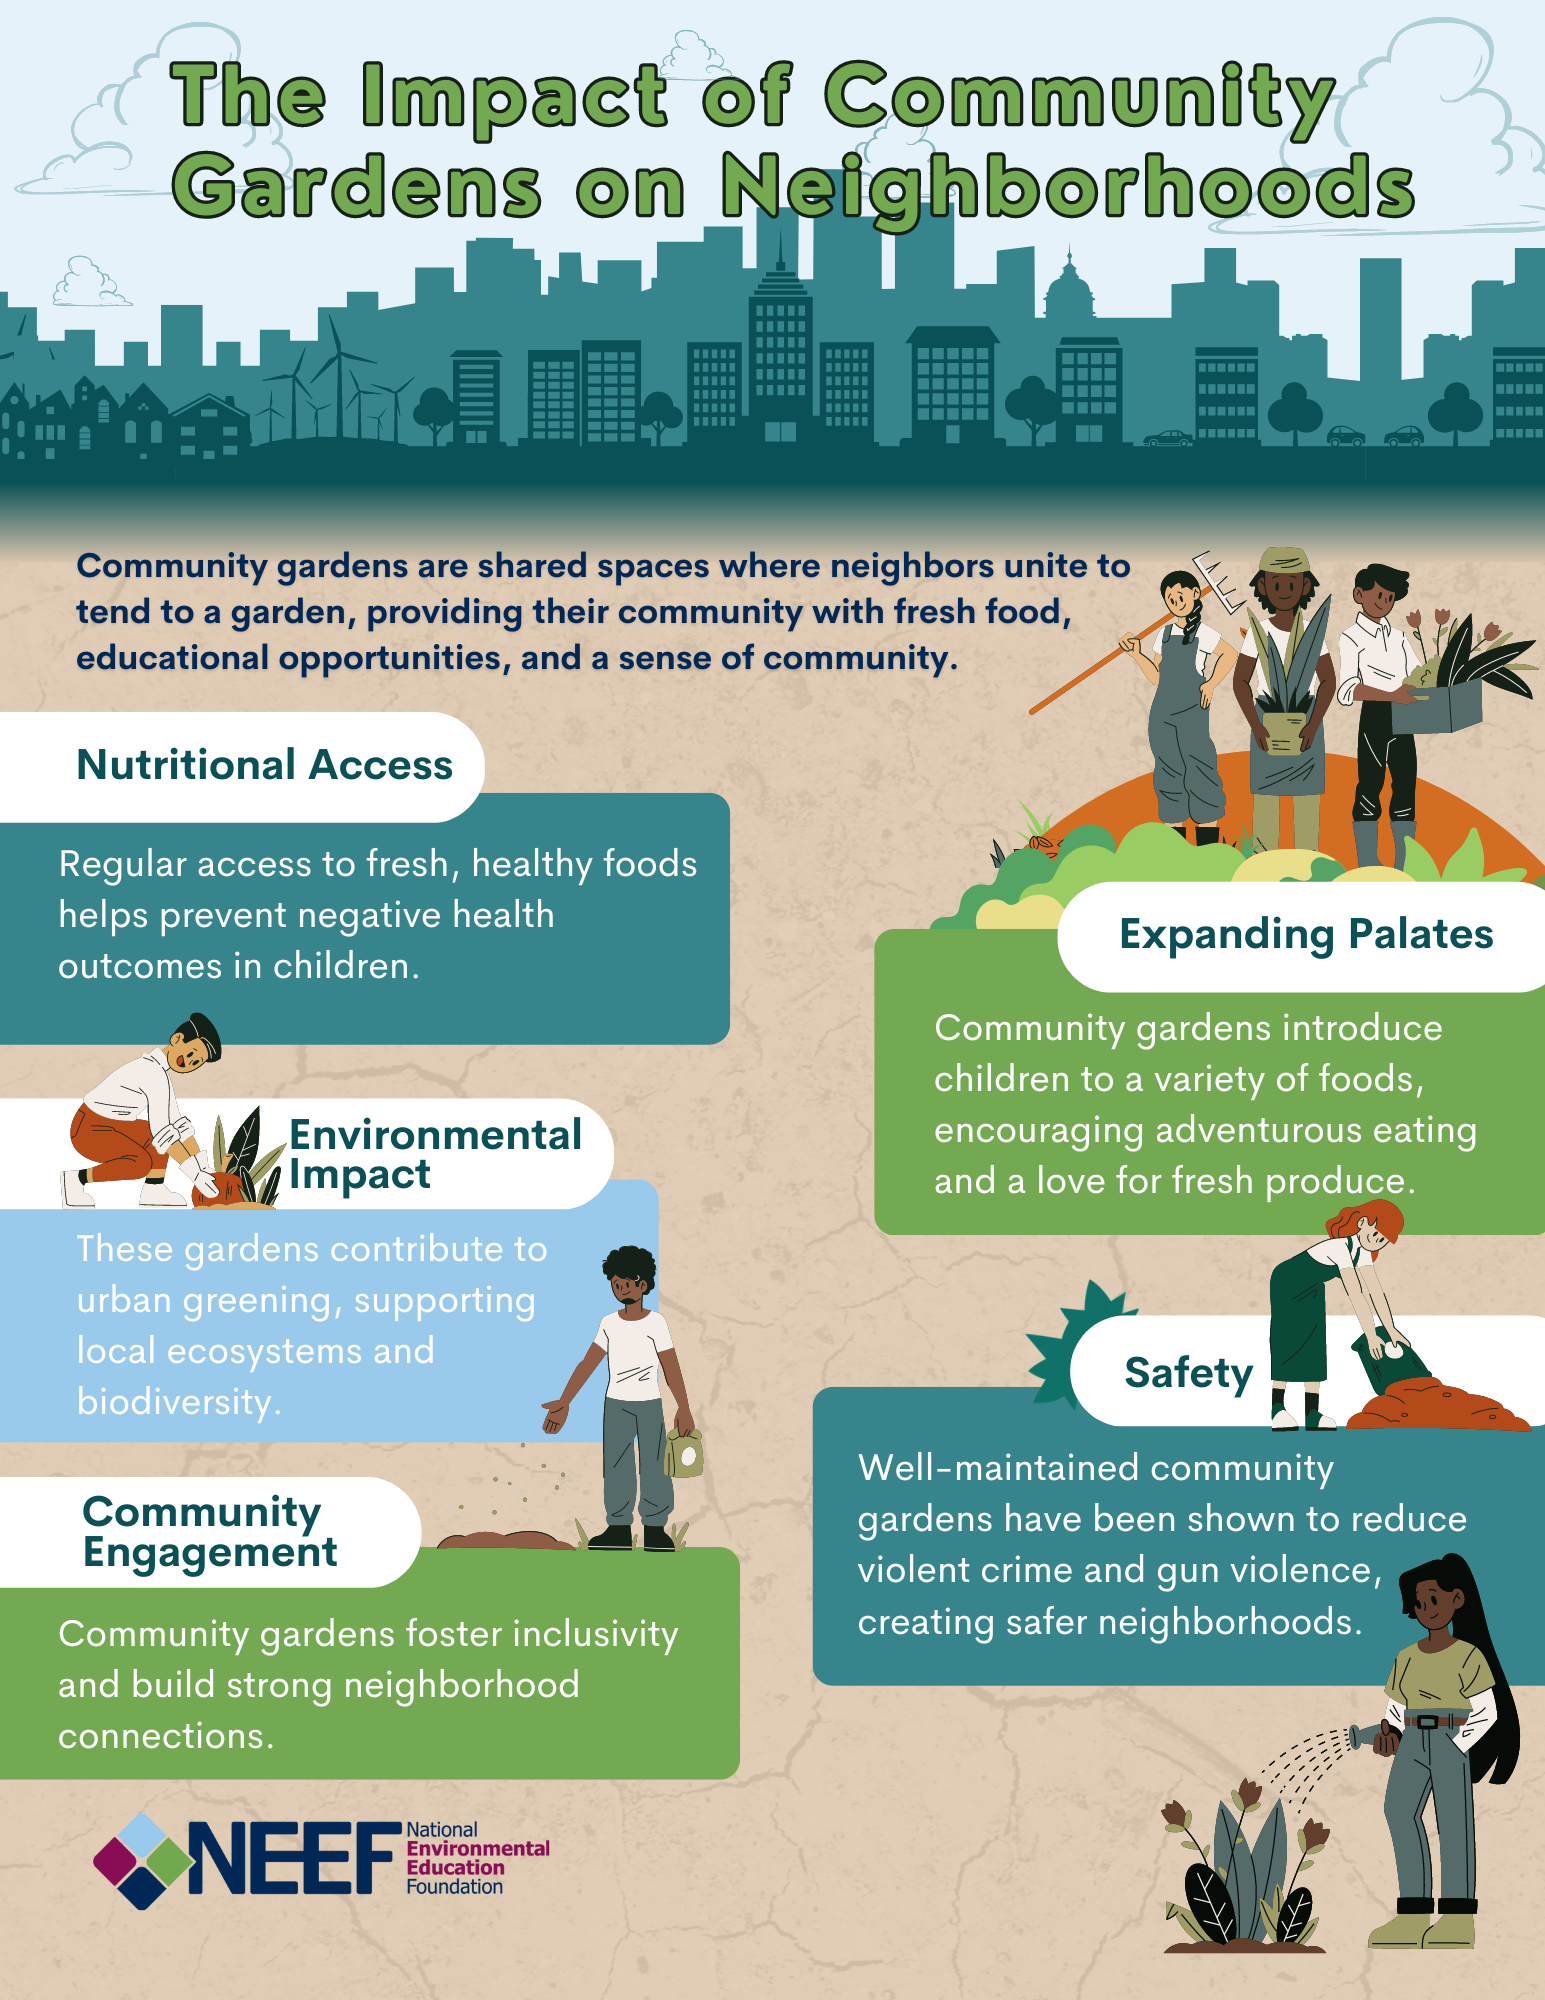 Infographic shows how community gardens improve neighborhood health and safety.